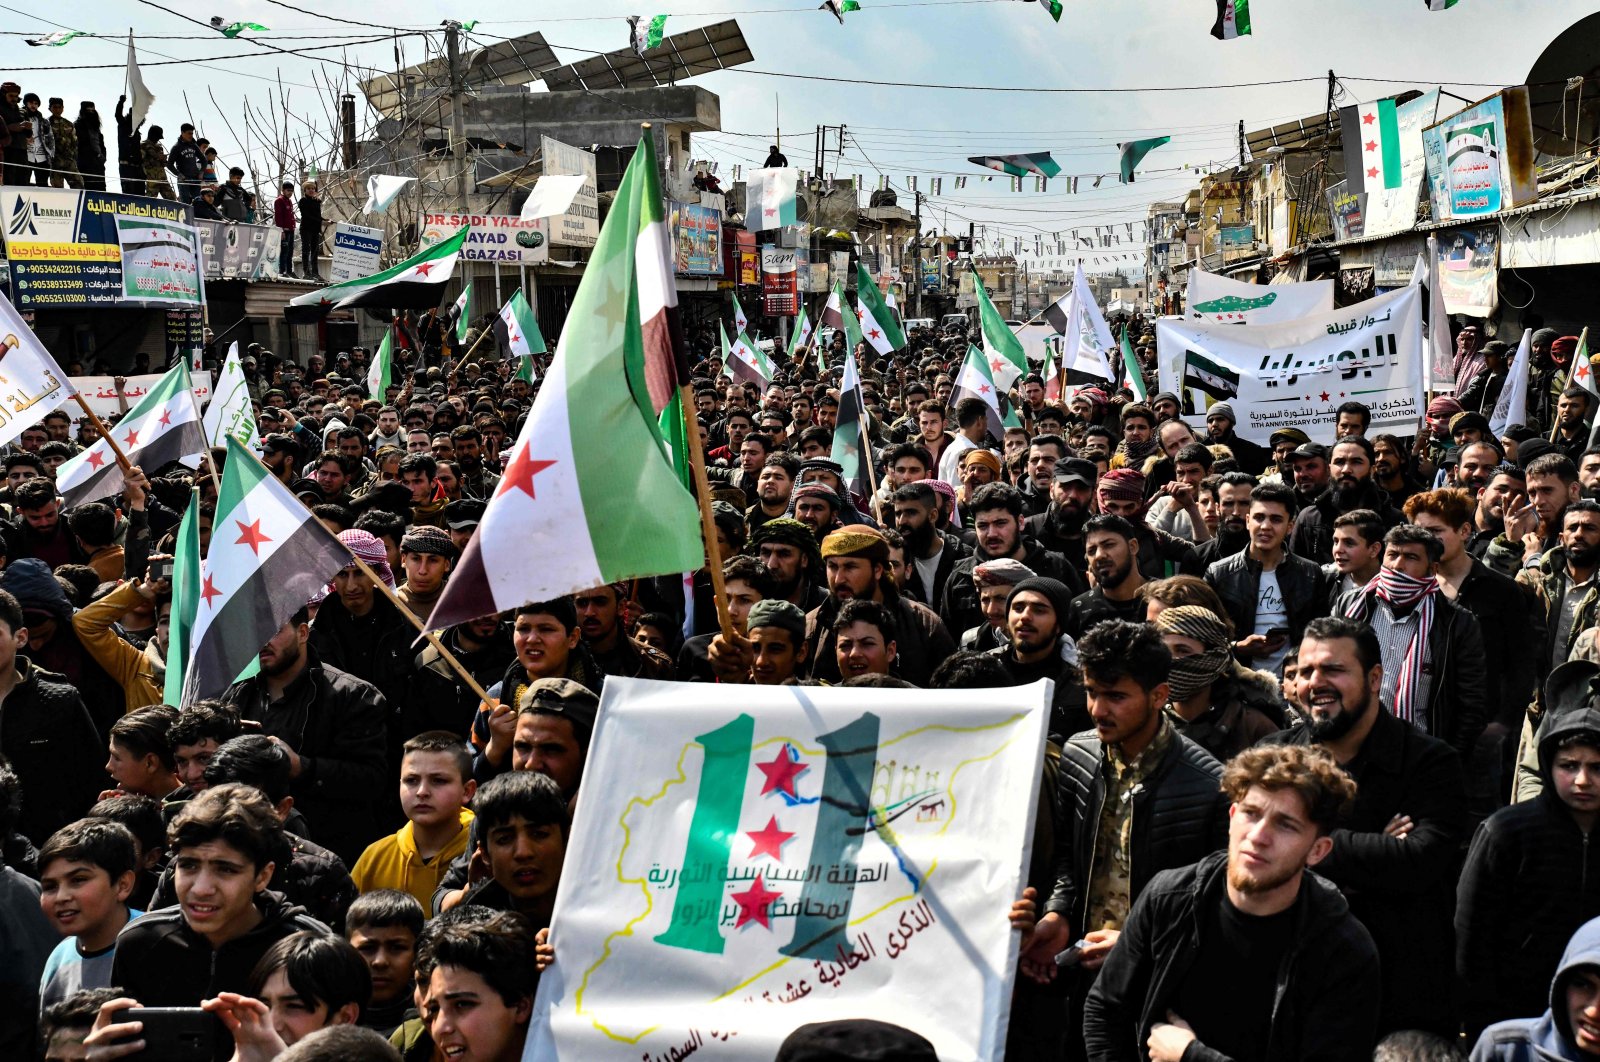 People wave Syrian opposition flags at a rally marking 11 years since the start of an anti-regime uprising, in Afrin in Syria&#039;s opposition-held northern Aleppo province, on March 18, 2022. (Photo by Rami al SAYED / AFP)